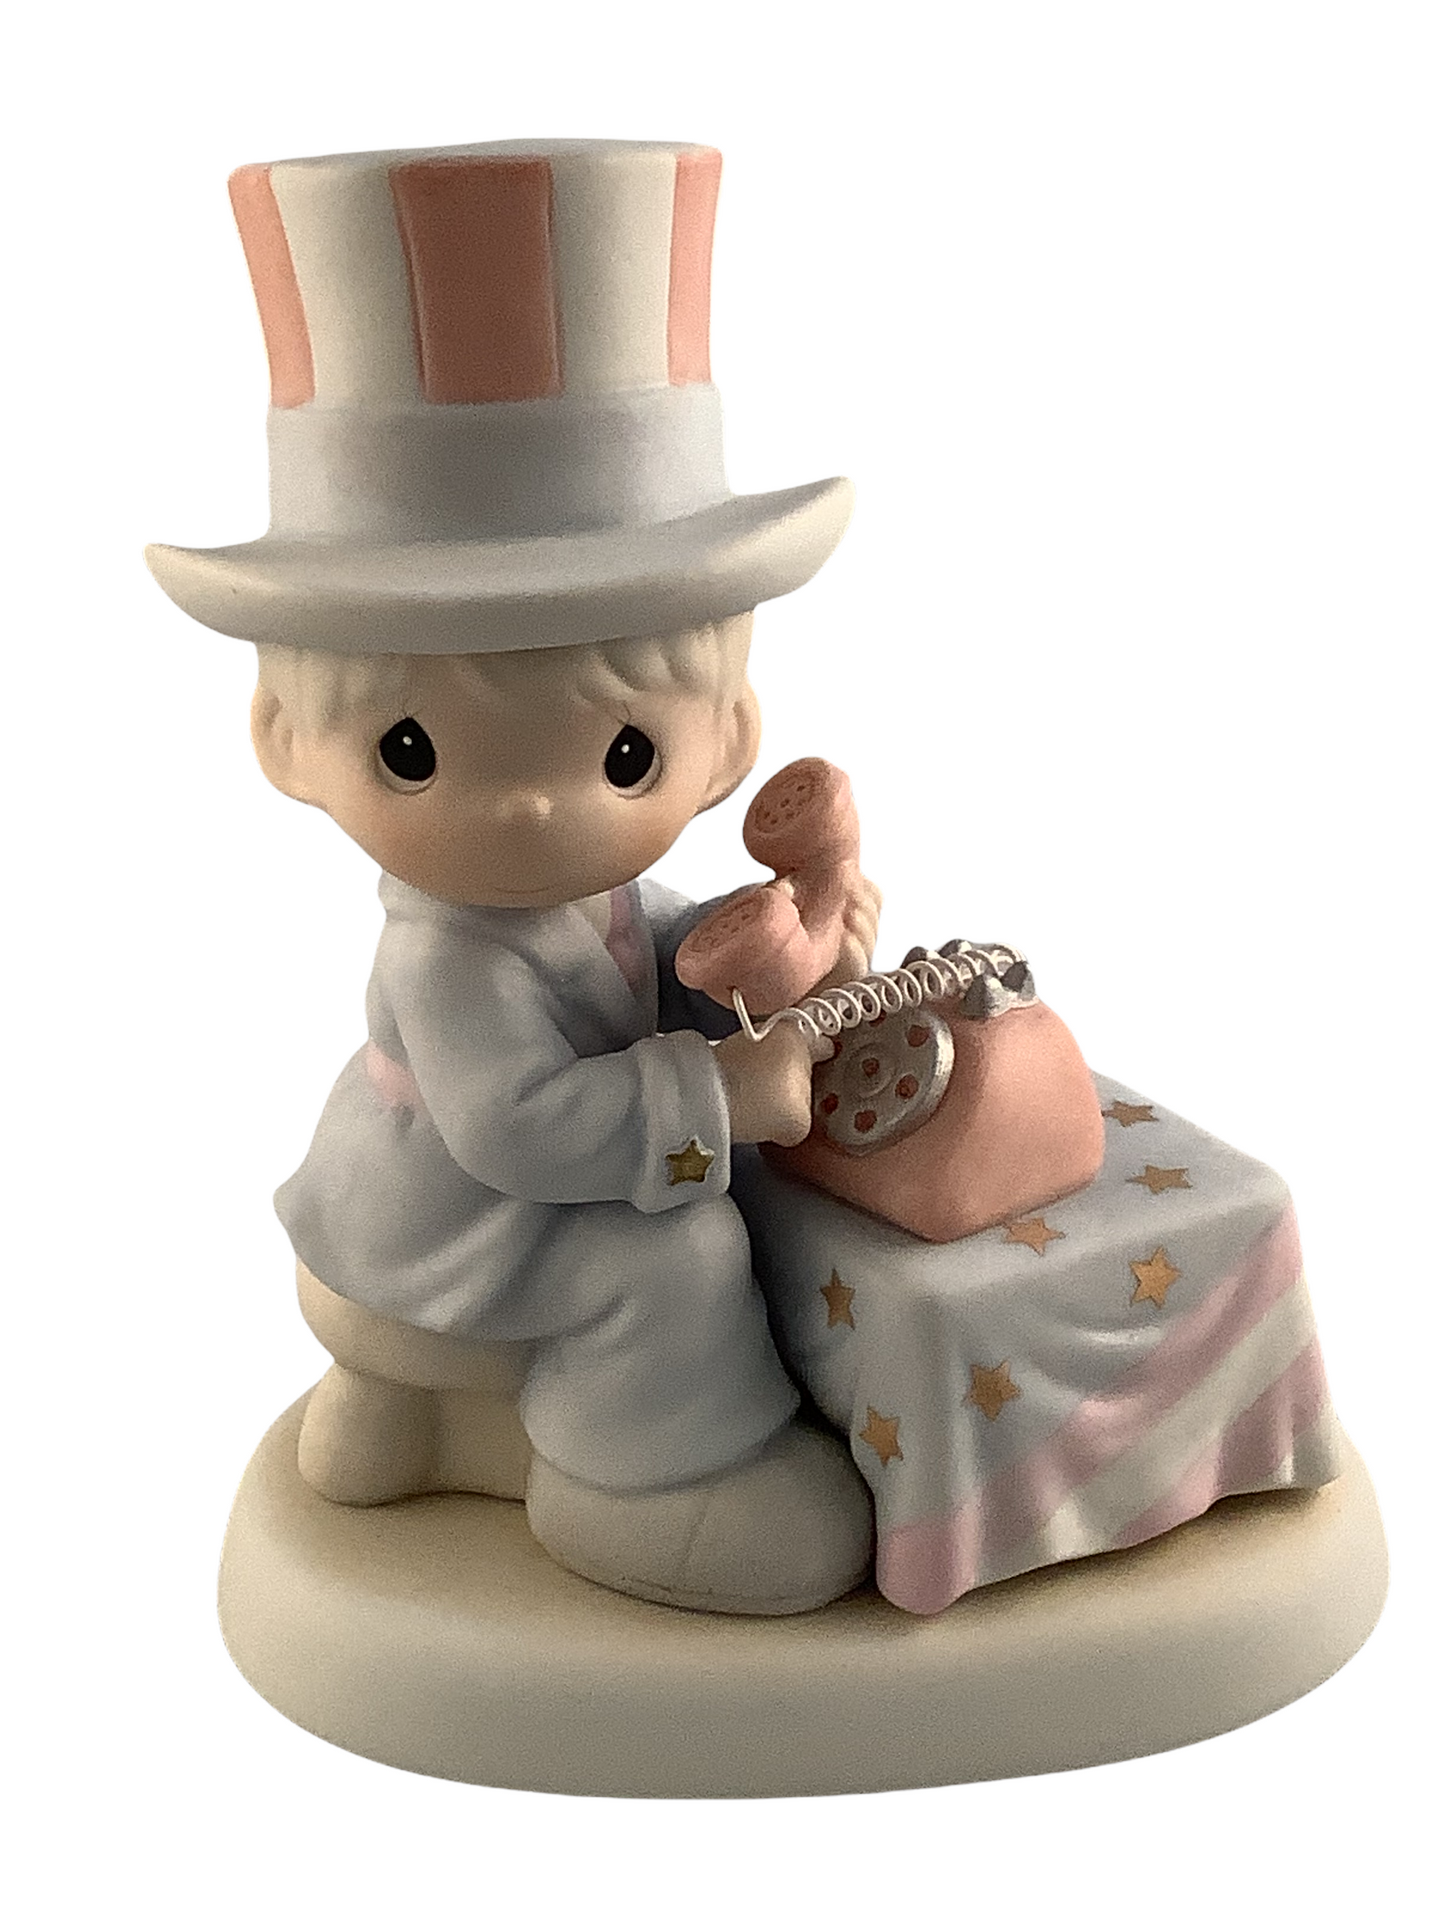 Let Freedom Ring - Precious Moment Figurine